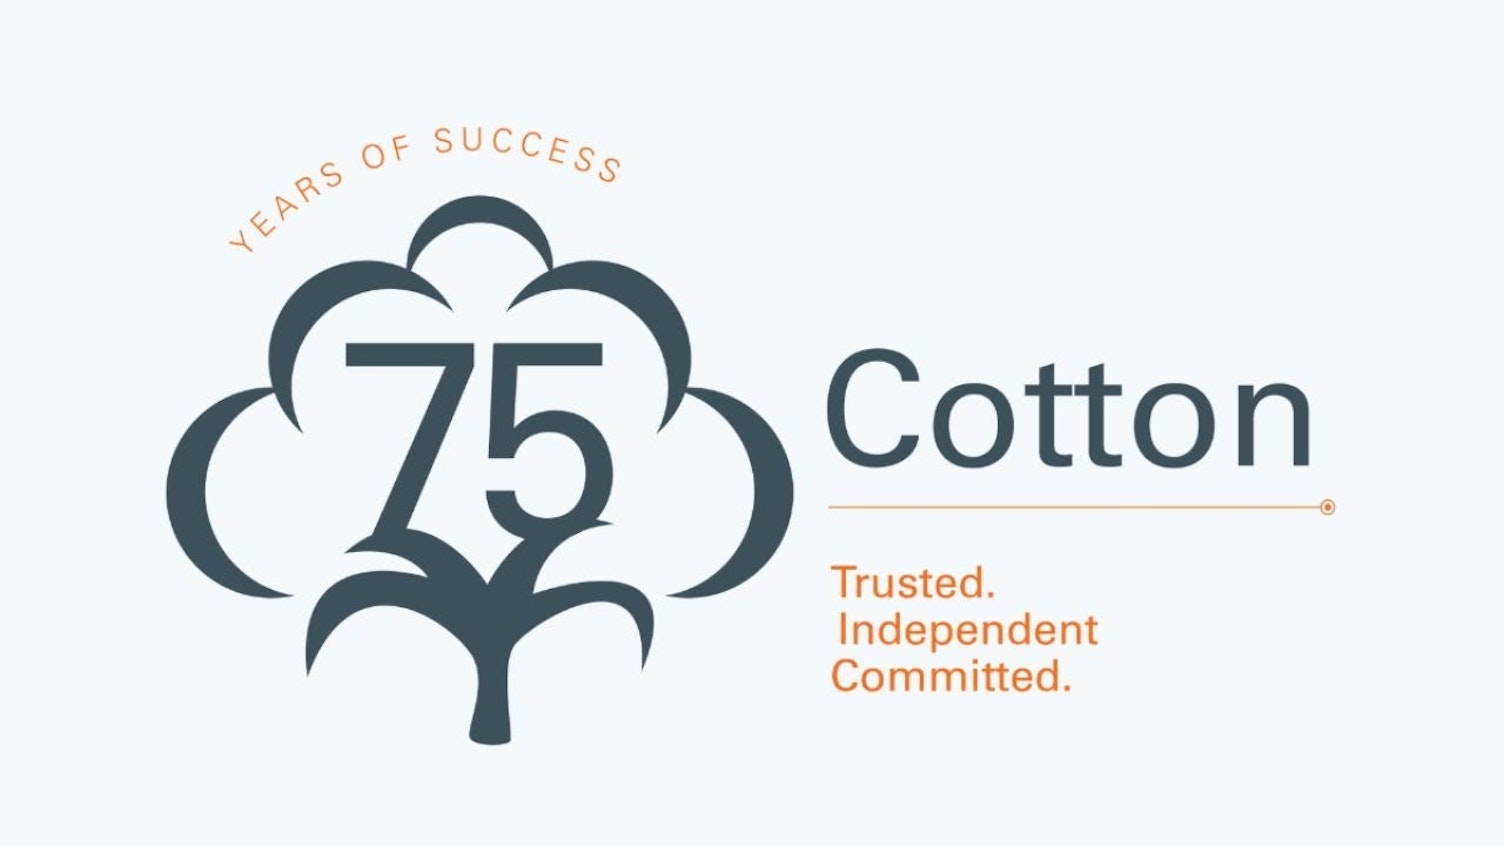 75 Years of Cotton Solutions